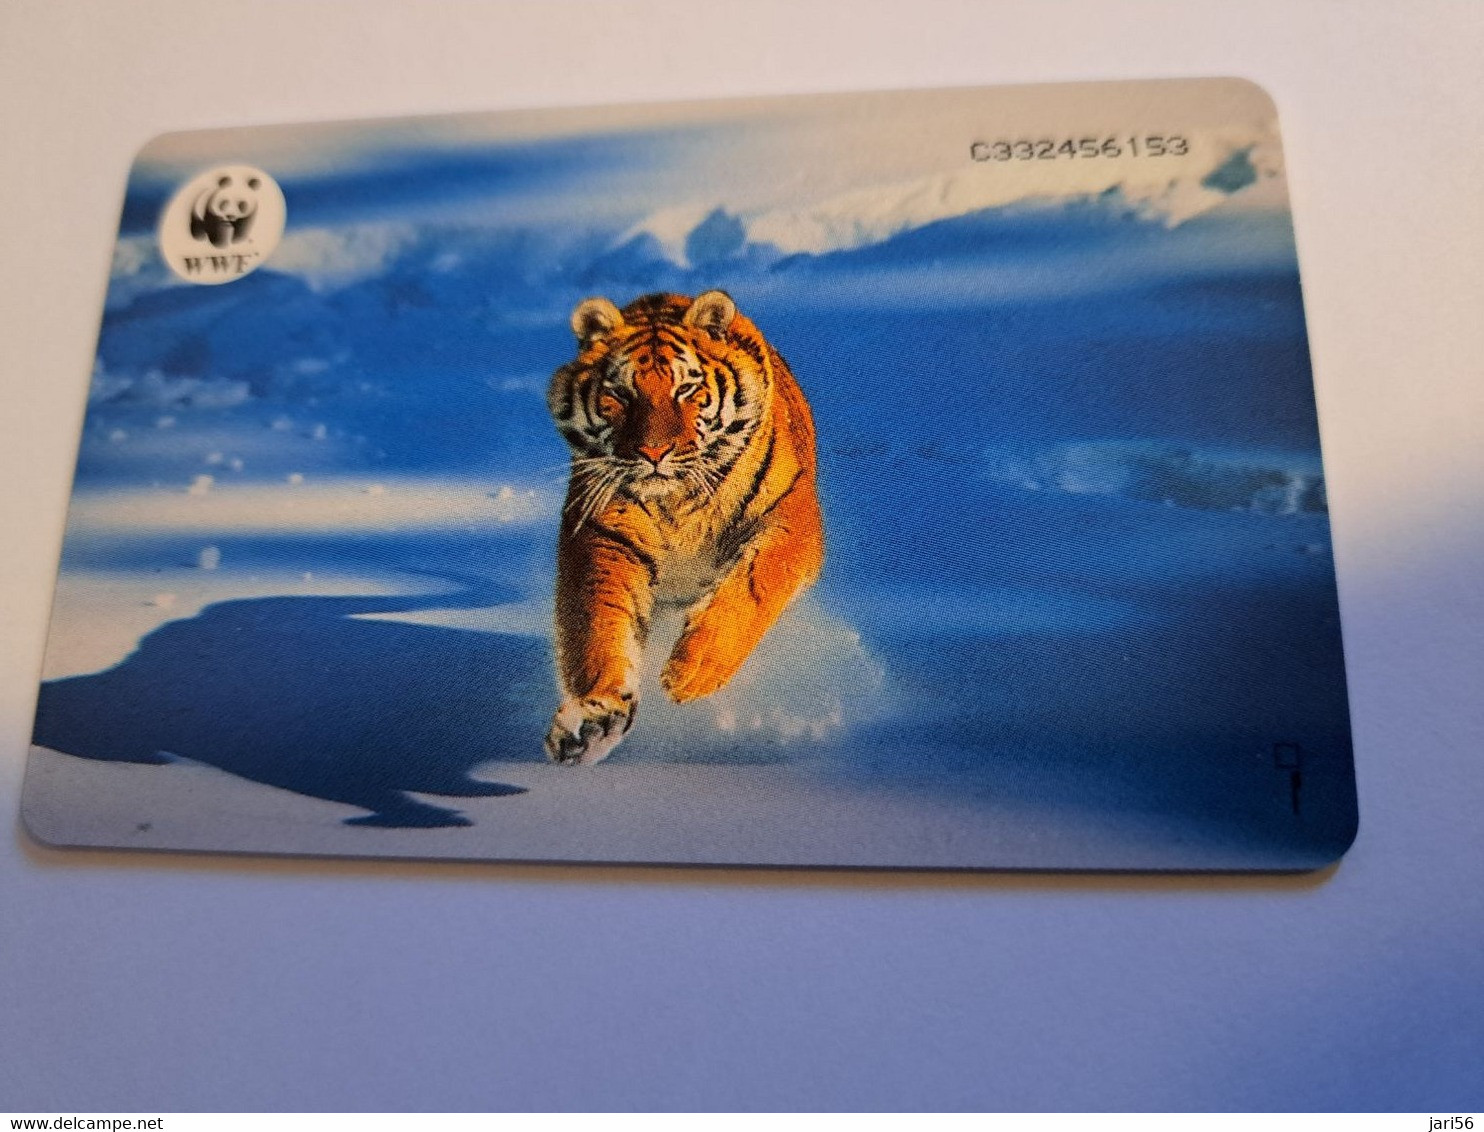 NETHERLANDS / WWF/WNF 1x TIGER/TIGRE  / CHIP ADVERTISING /DIFFICULT /  HFL 2,50 /CRD 531.01  MINT !!  ** 11987** - Privé